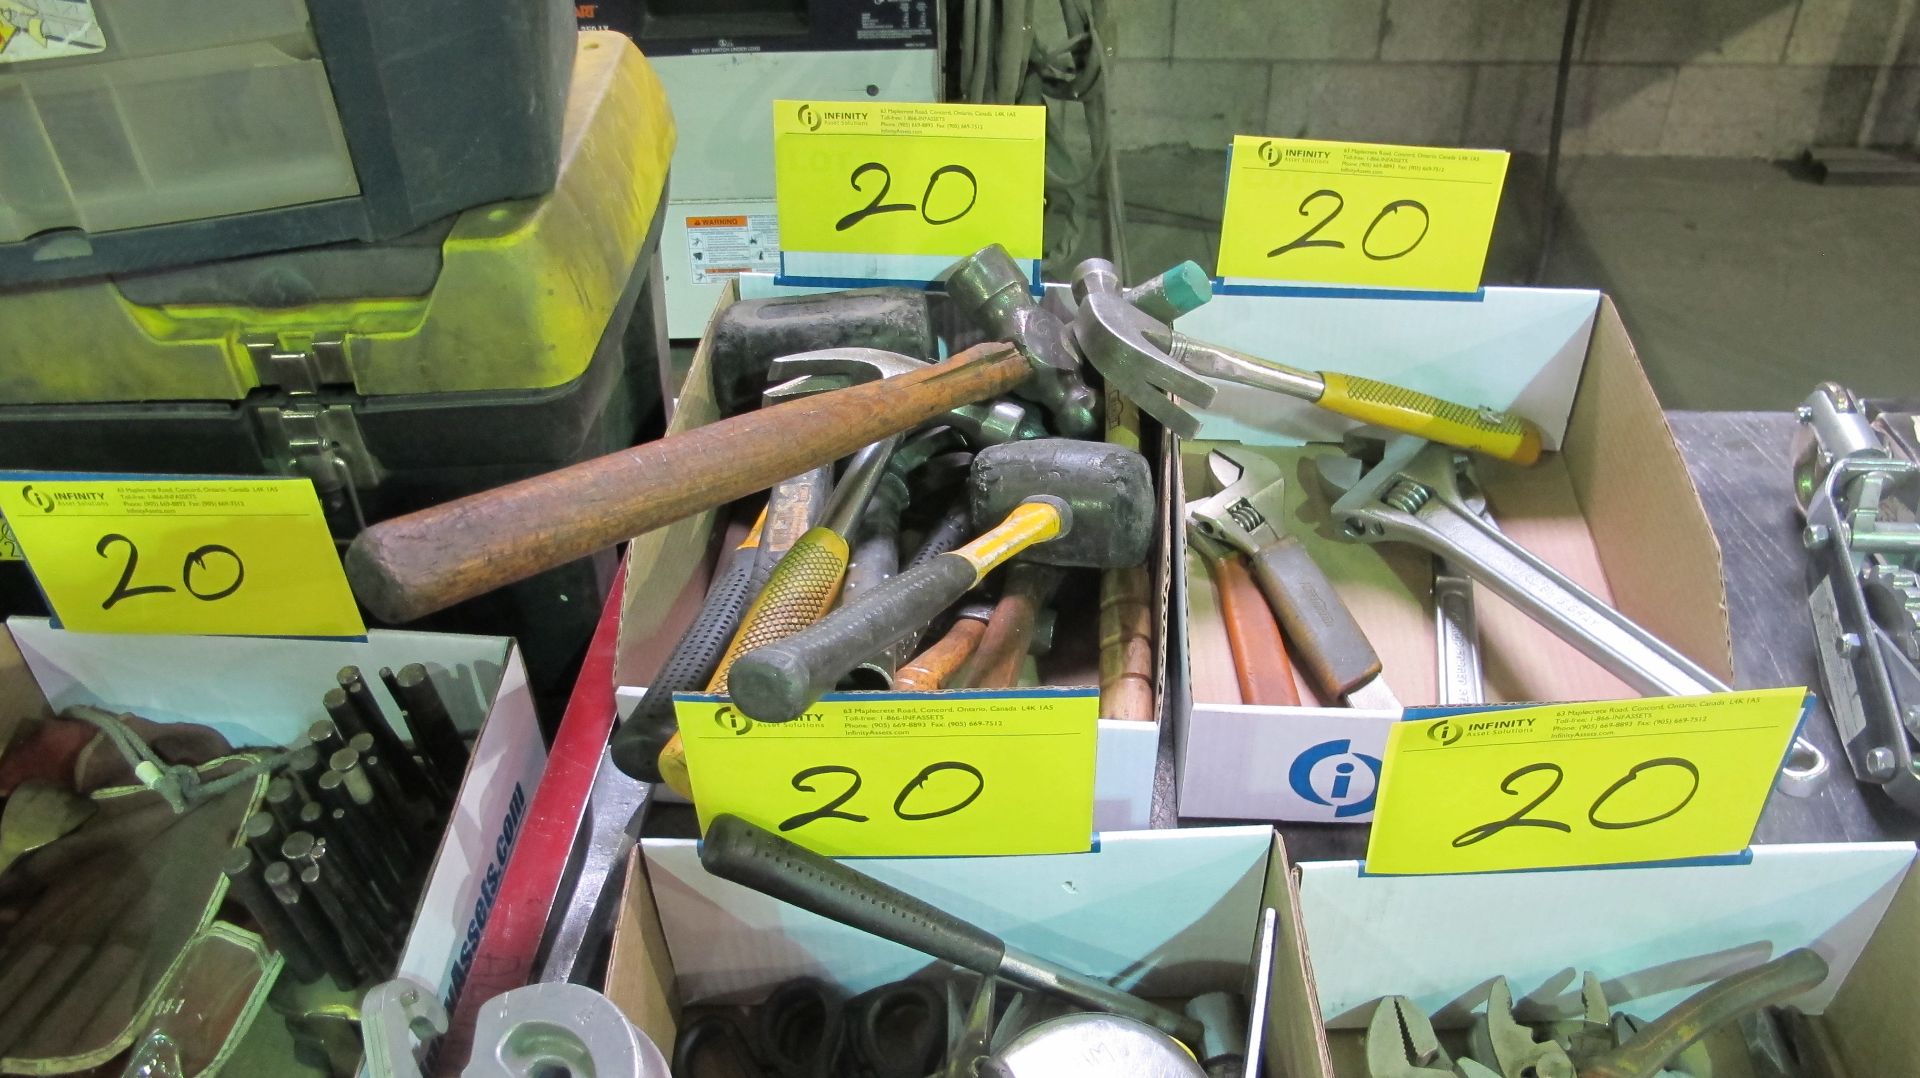 LOT ASST. SHRINK WRAP TOOLS, LIGHTS, CONDUIT BENDERS, PUNCHES, HAND TOOLS, TOOLBOXES, ETC. - Image 3 of 3